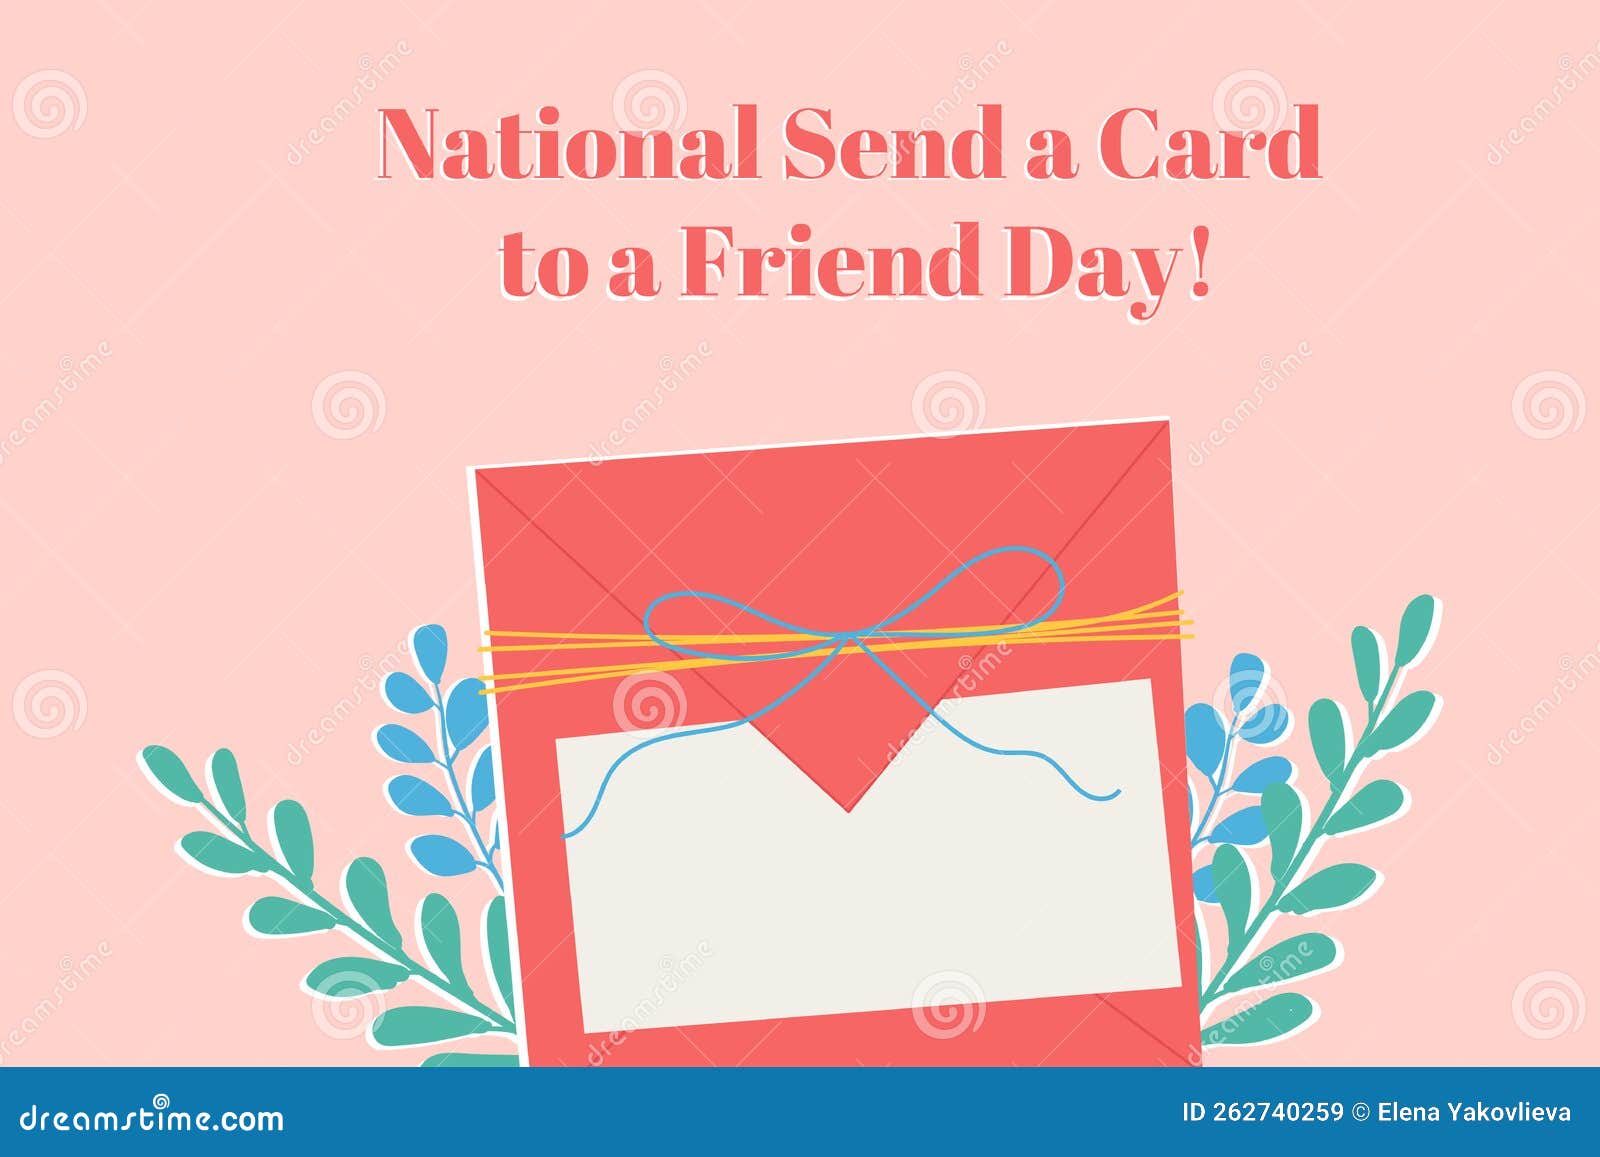 Envelopes. National Send a Card To a Friend Day Stock Vector